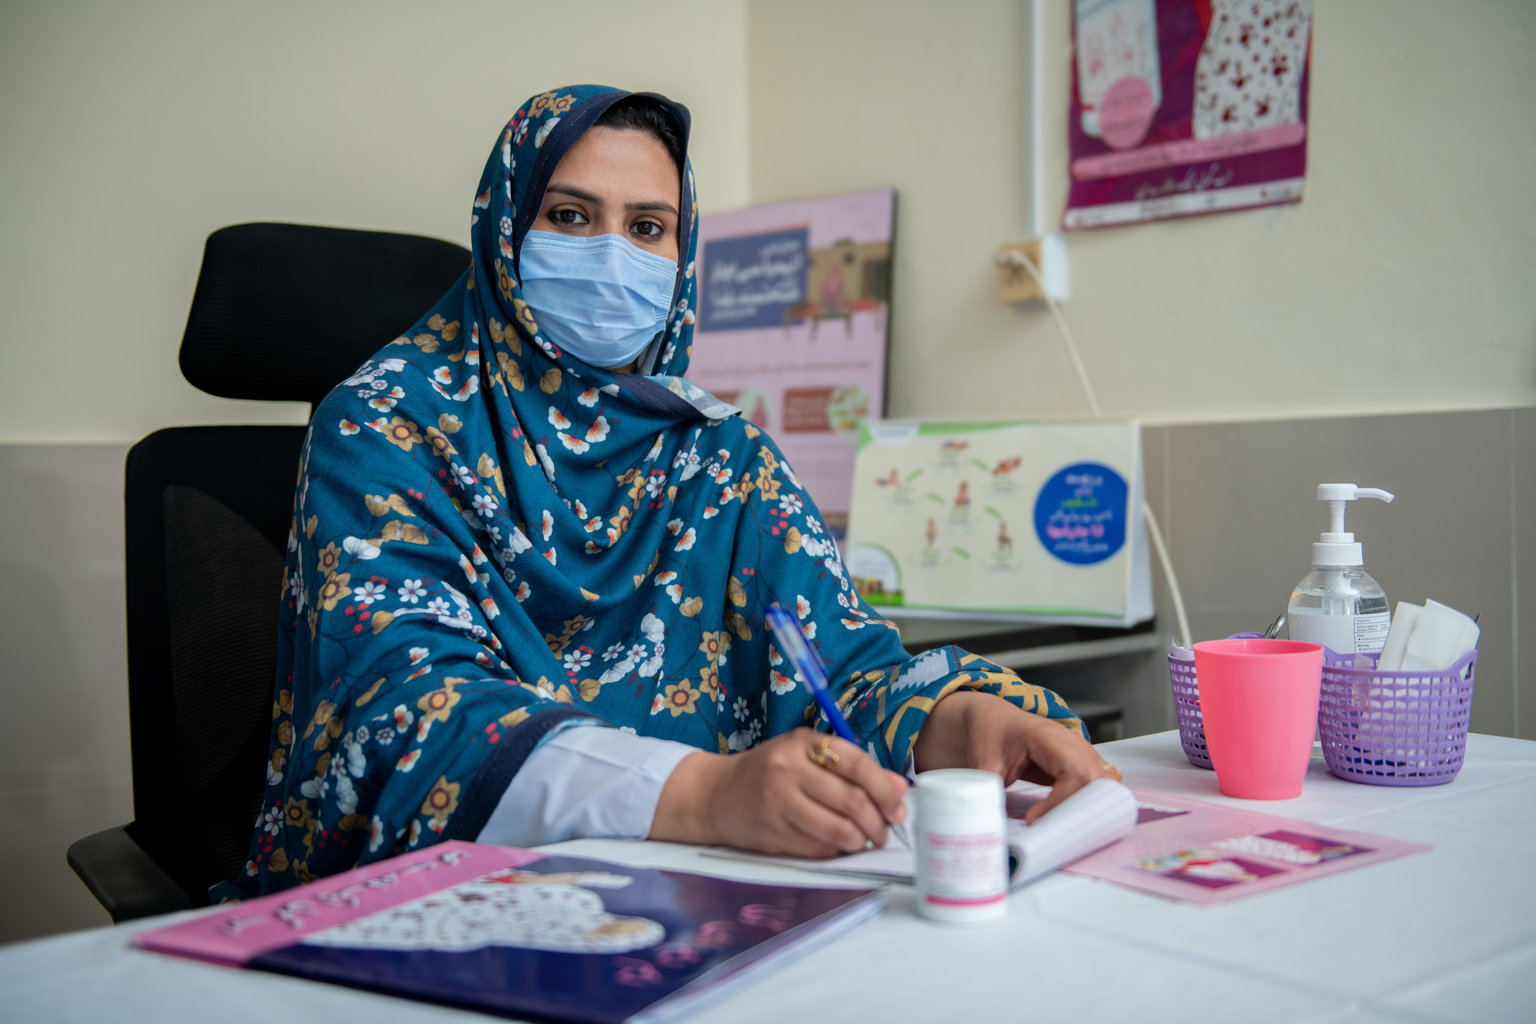 A woman sits behind a desk wearing a mask and looking directly to the camera. She is holding a pen and has information on maternal nutrition on her desk.